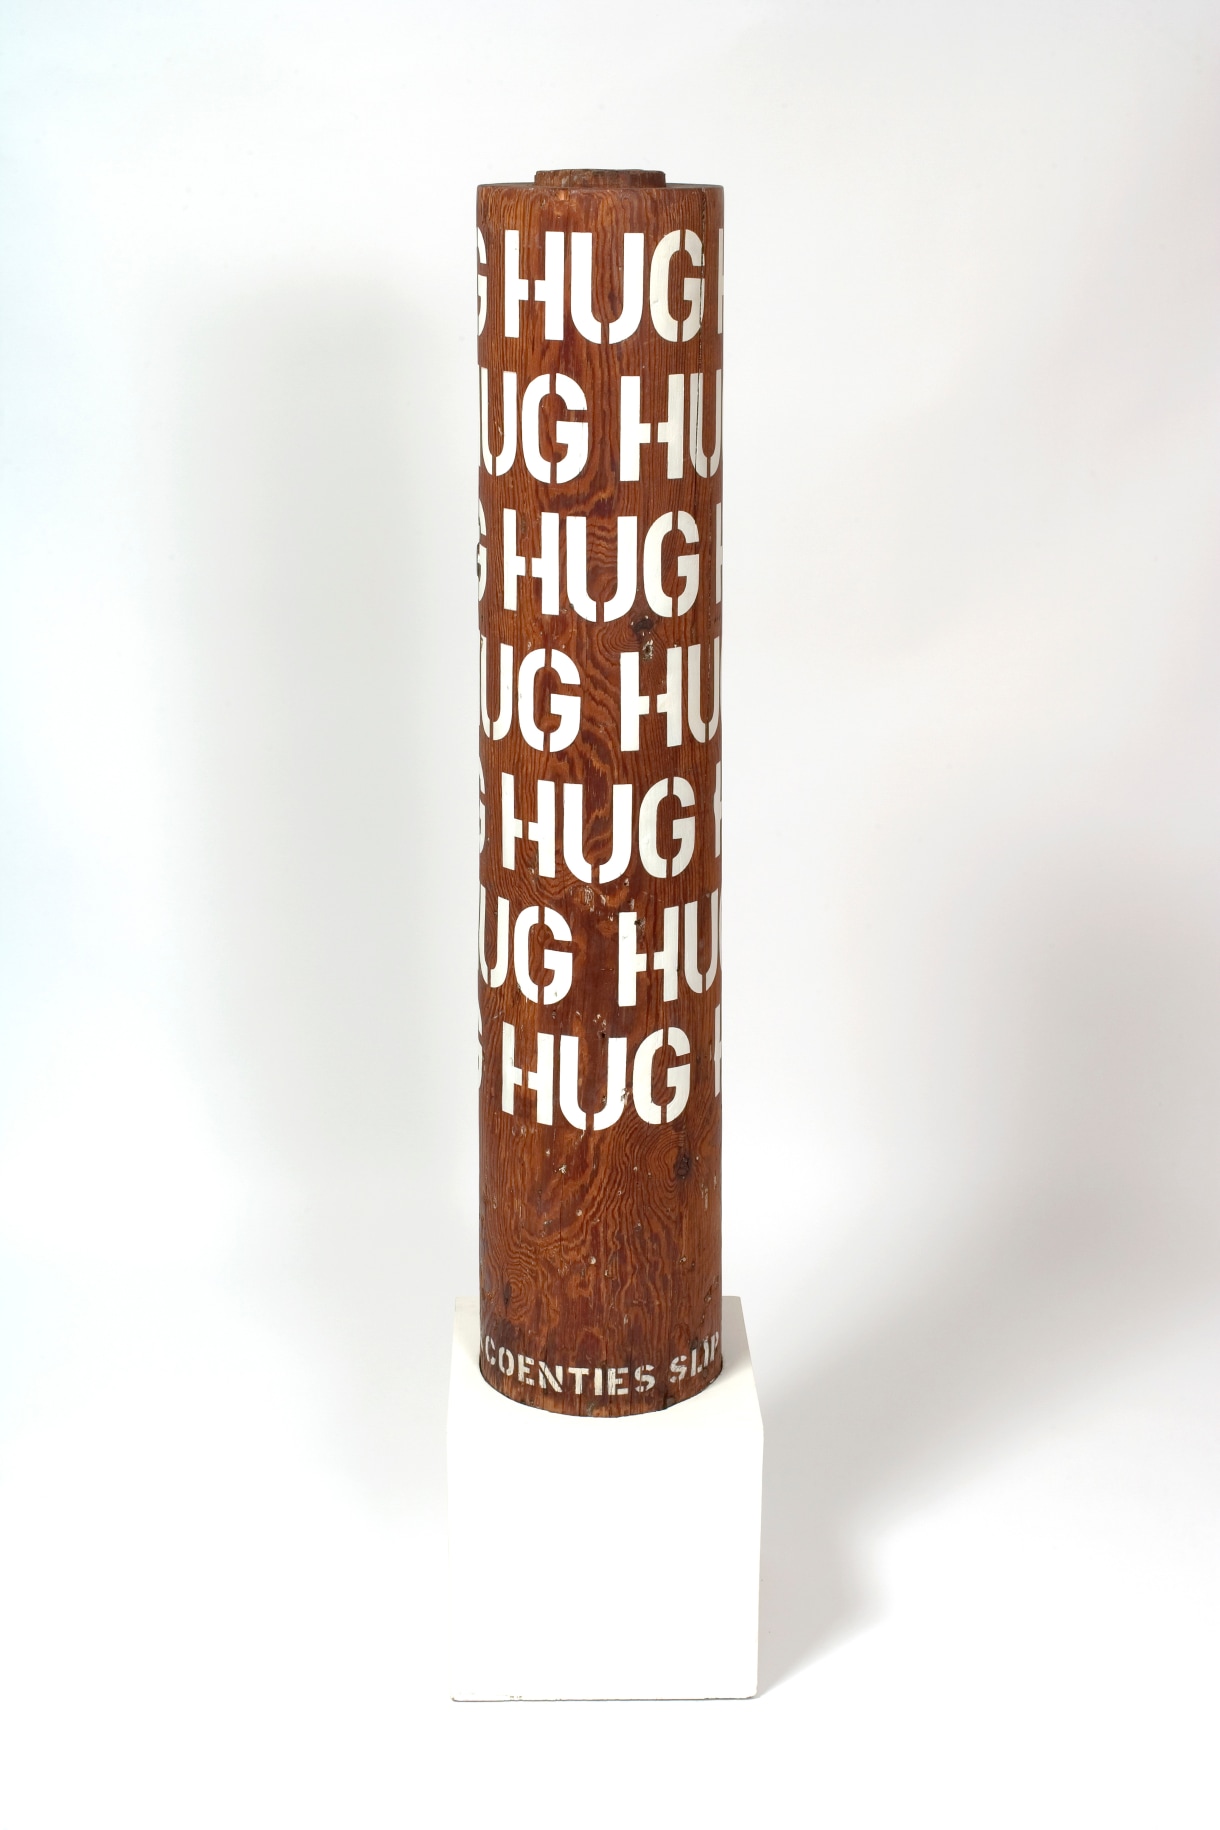 A column with seven rows of the word hug in gesso stenciled letters wrapping around the upper three quarters of the sculpture.